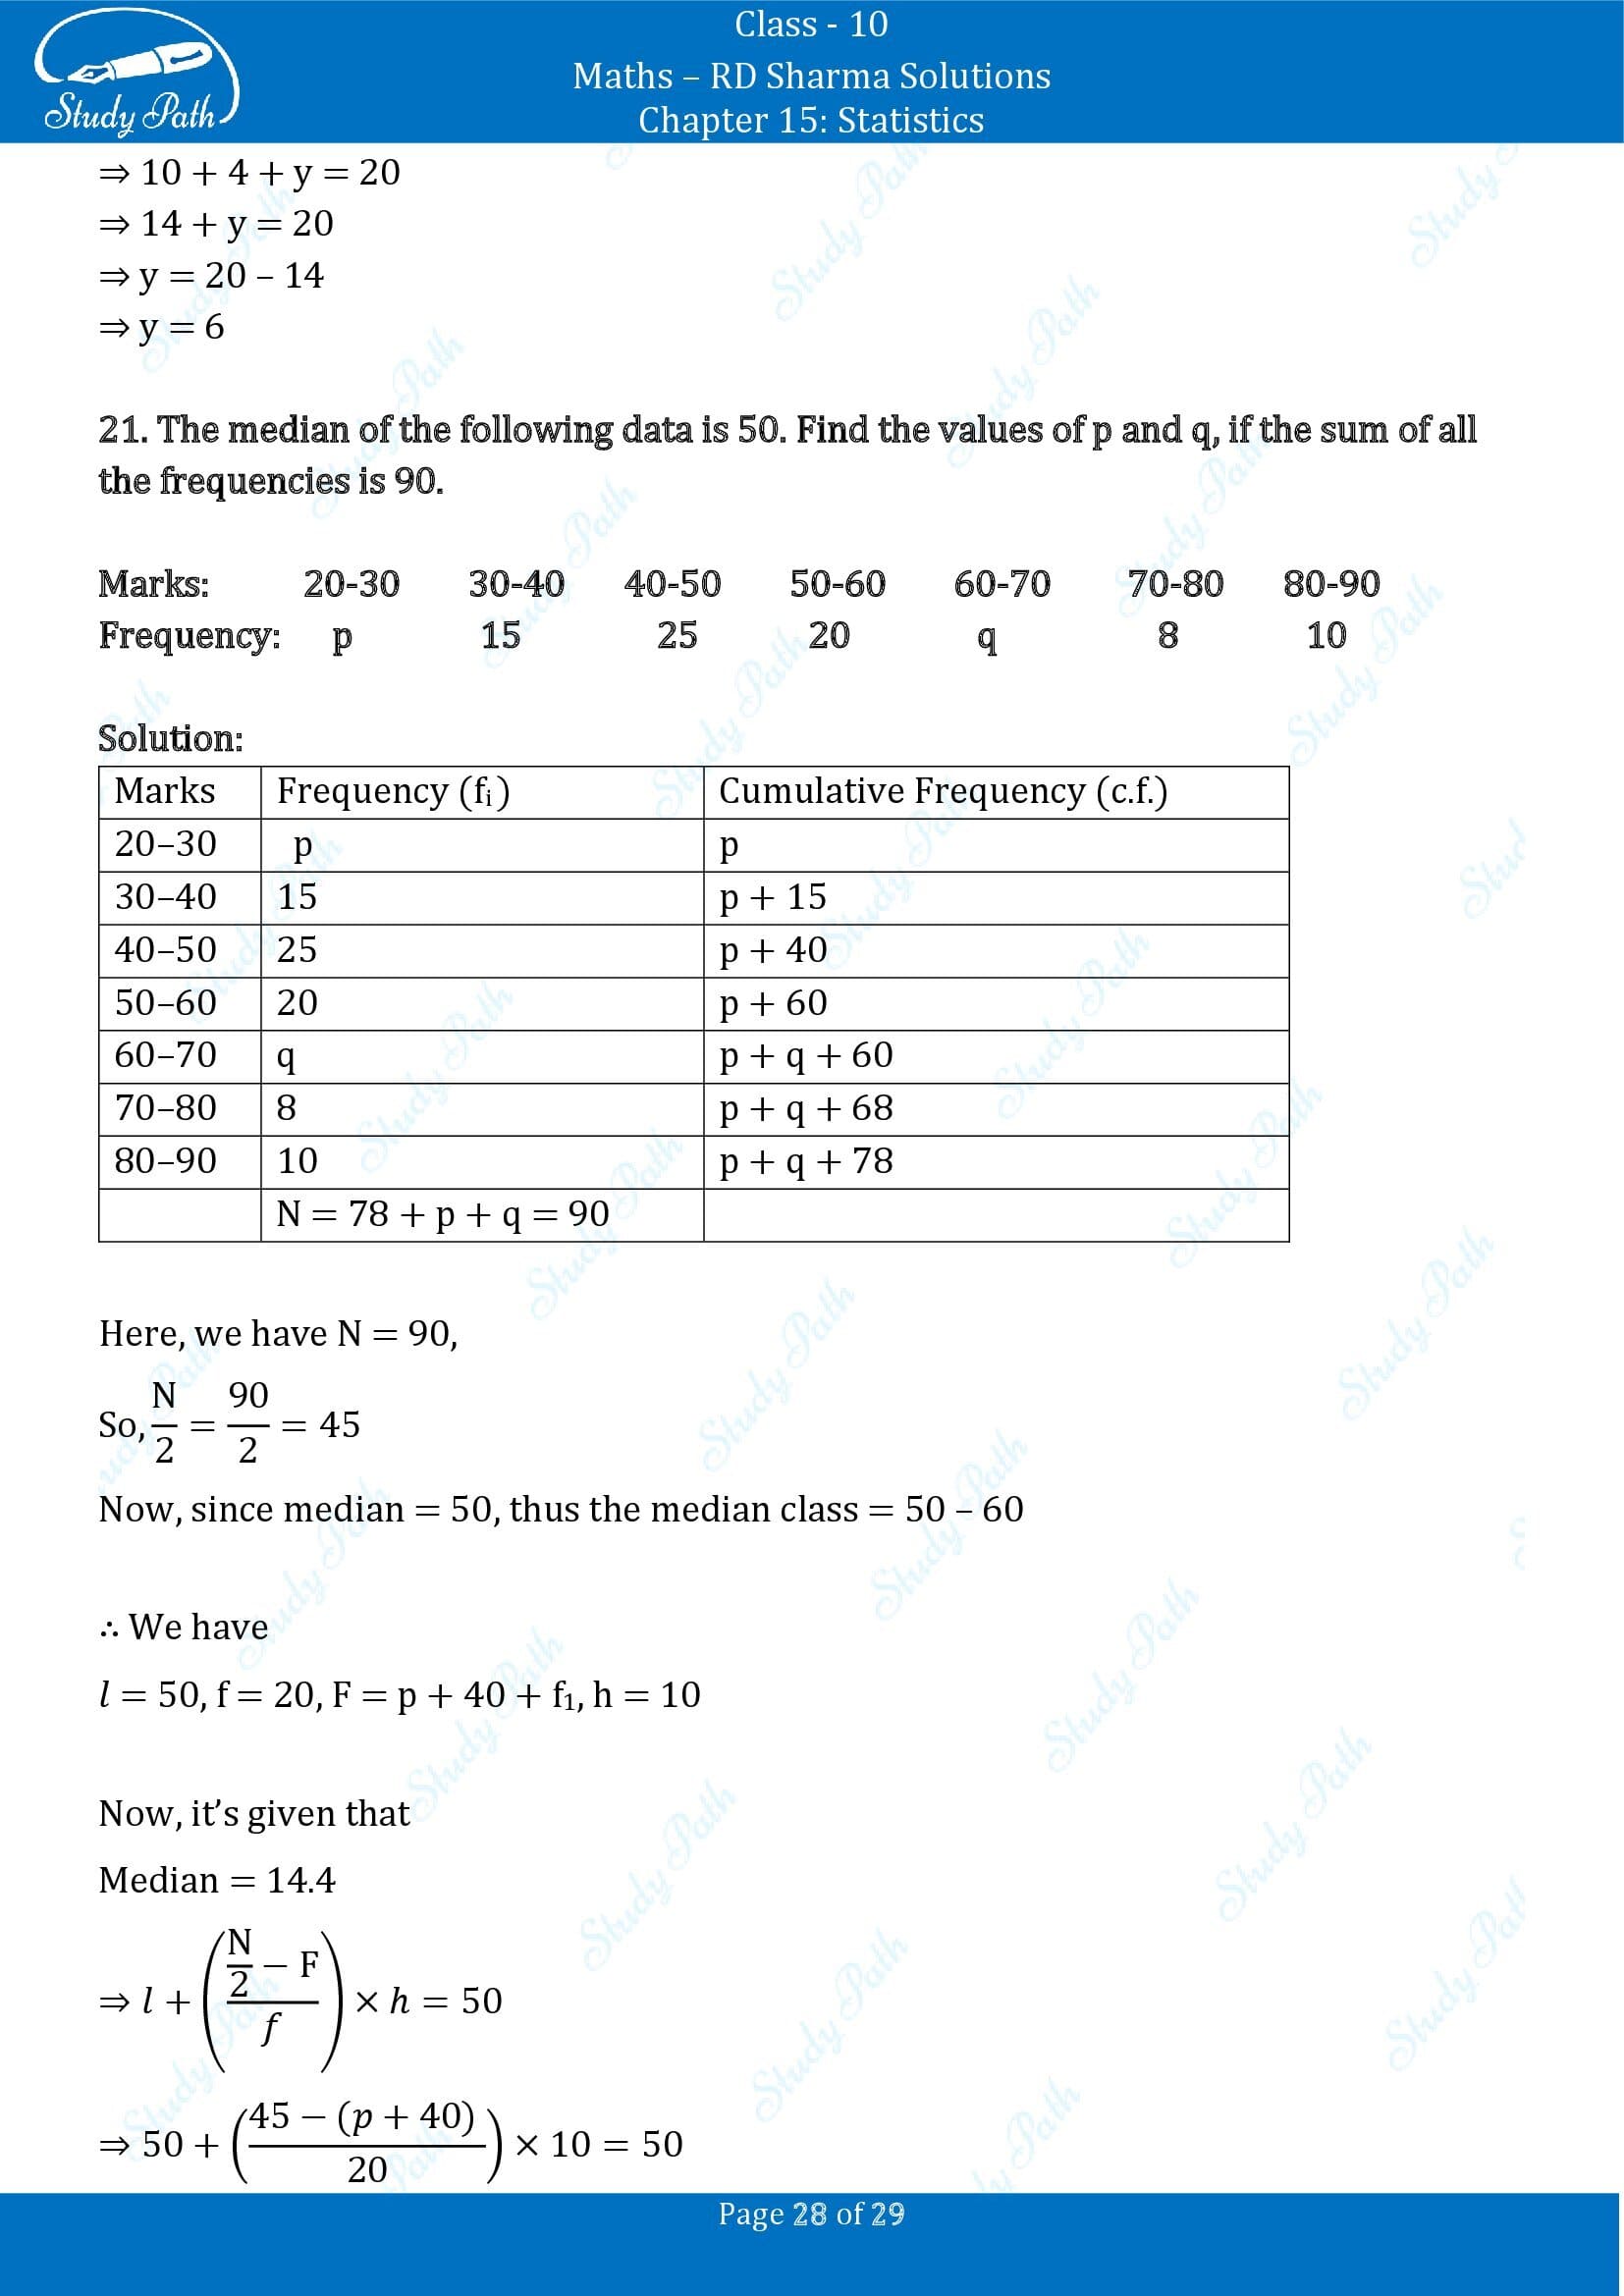 RD Sharma Solutions Class 10 Chapter 15 Statistics Exercise 15.4 00028